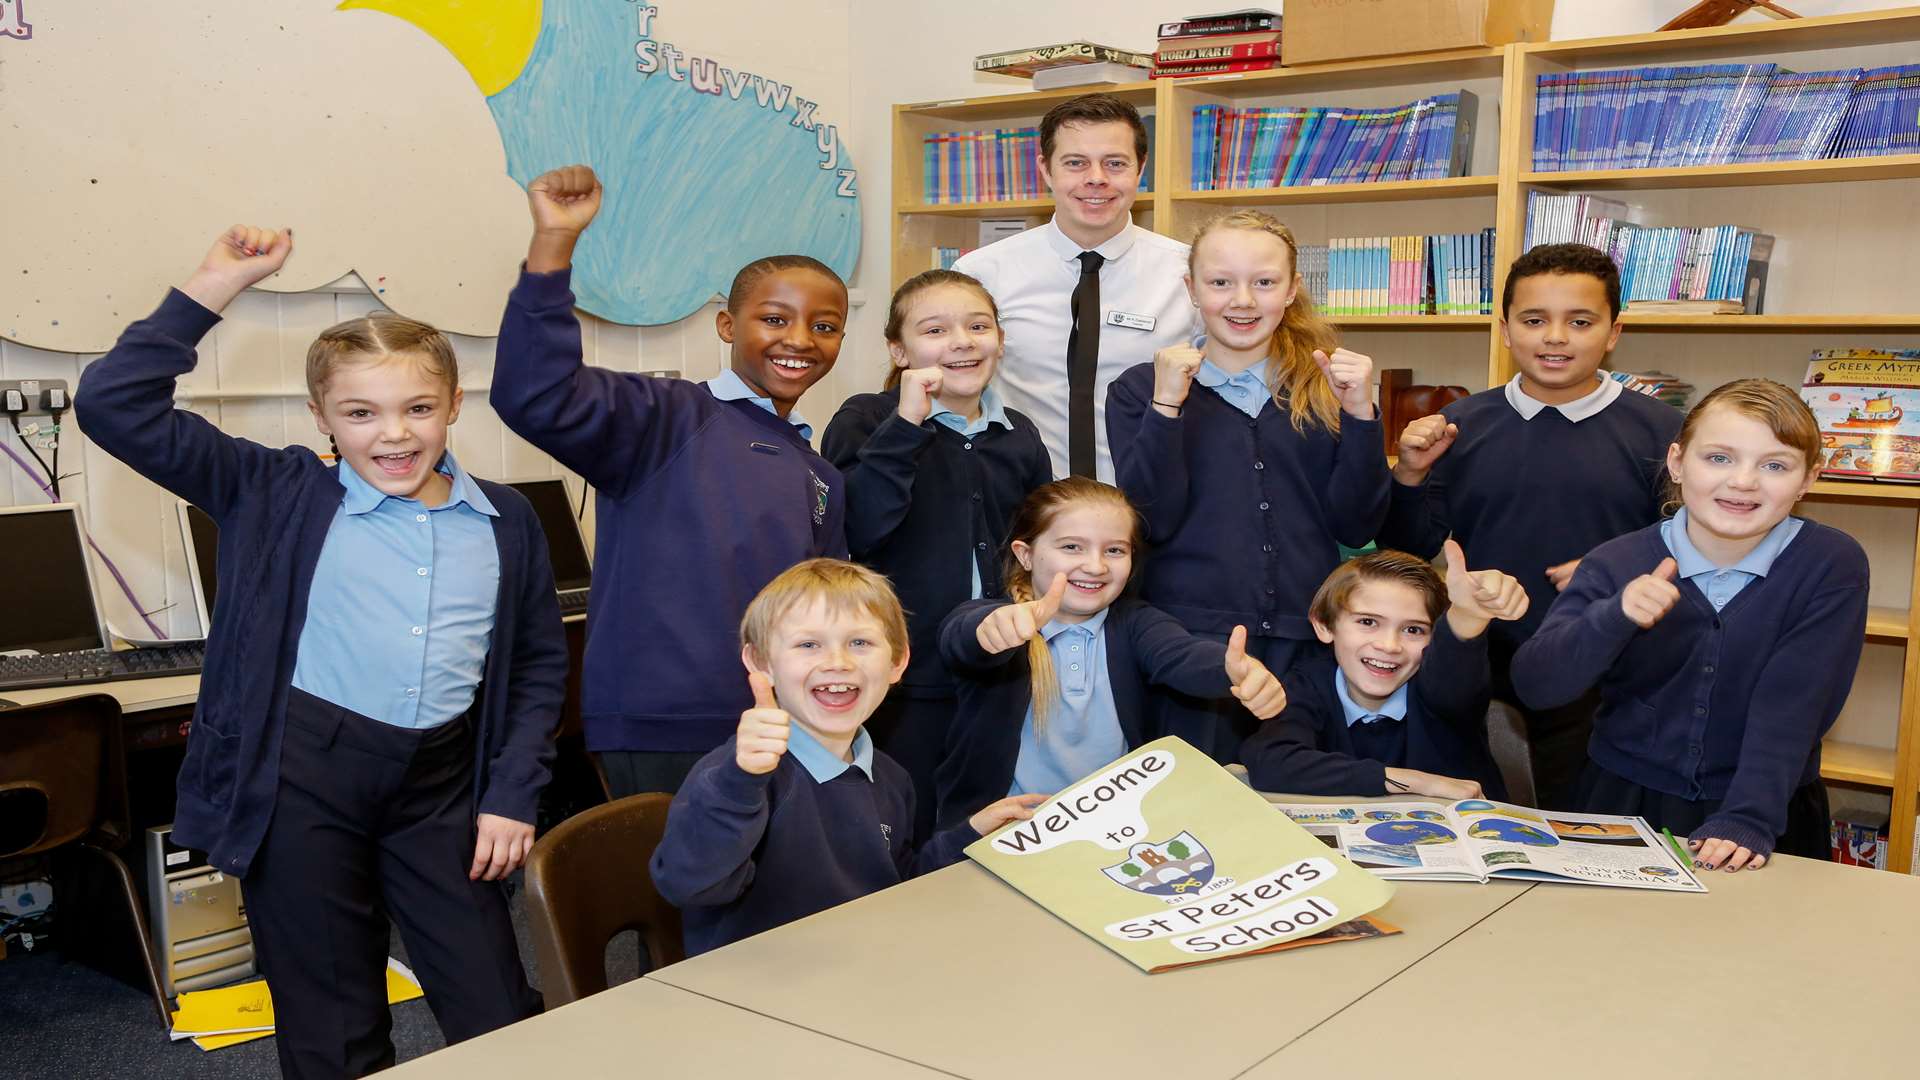 Year 6 teacher Kieron Eastwood with pupils from year's 4, 5 and 6 celebrating a good Ofsted report.